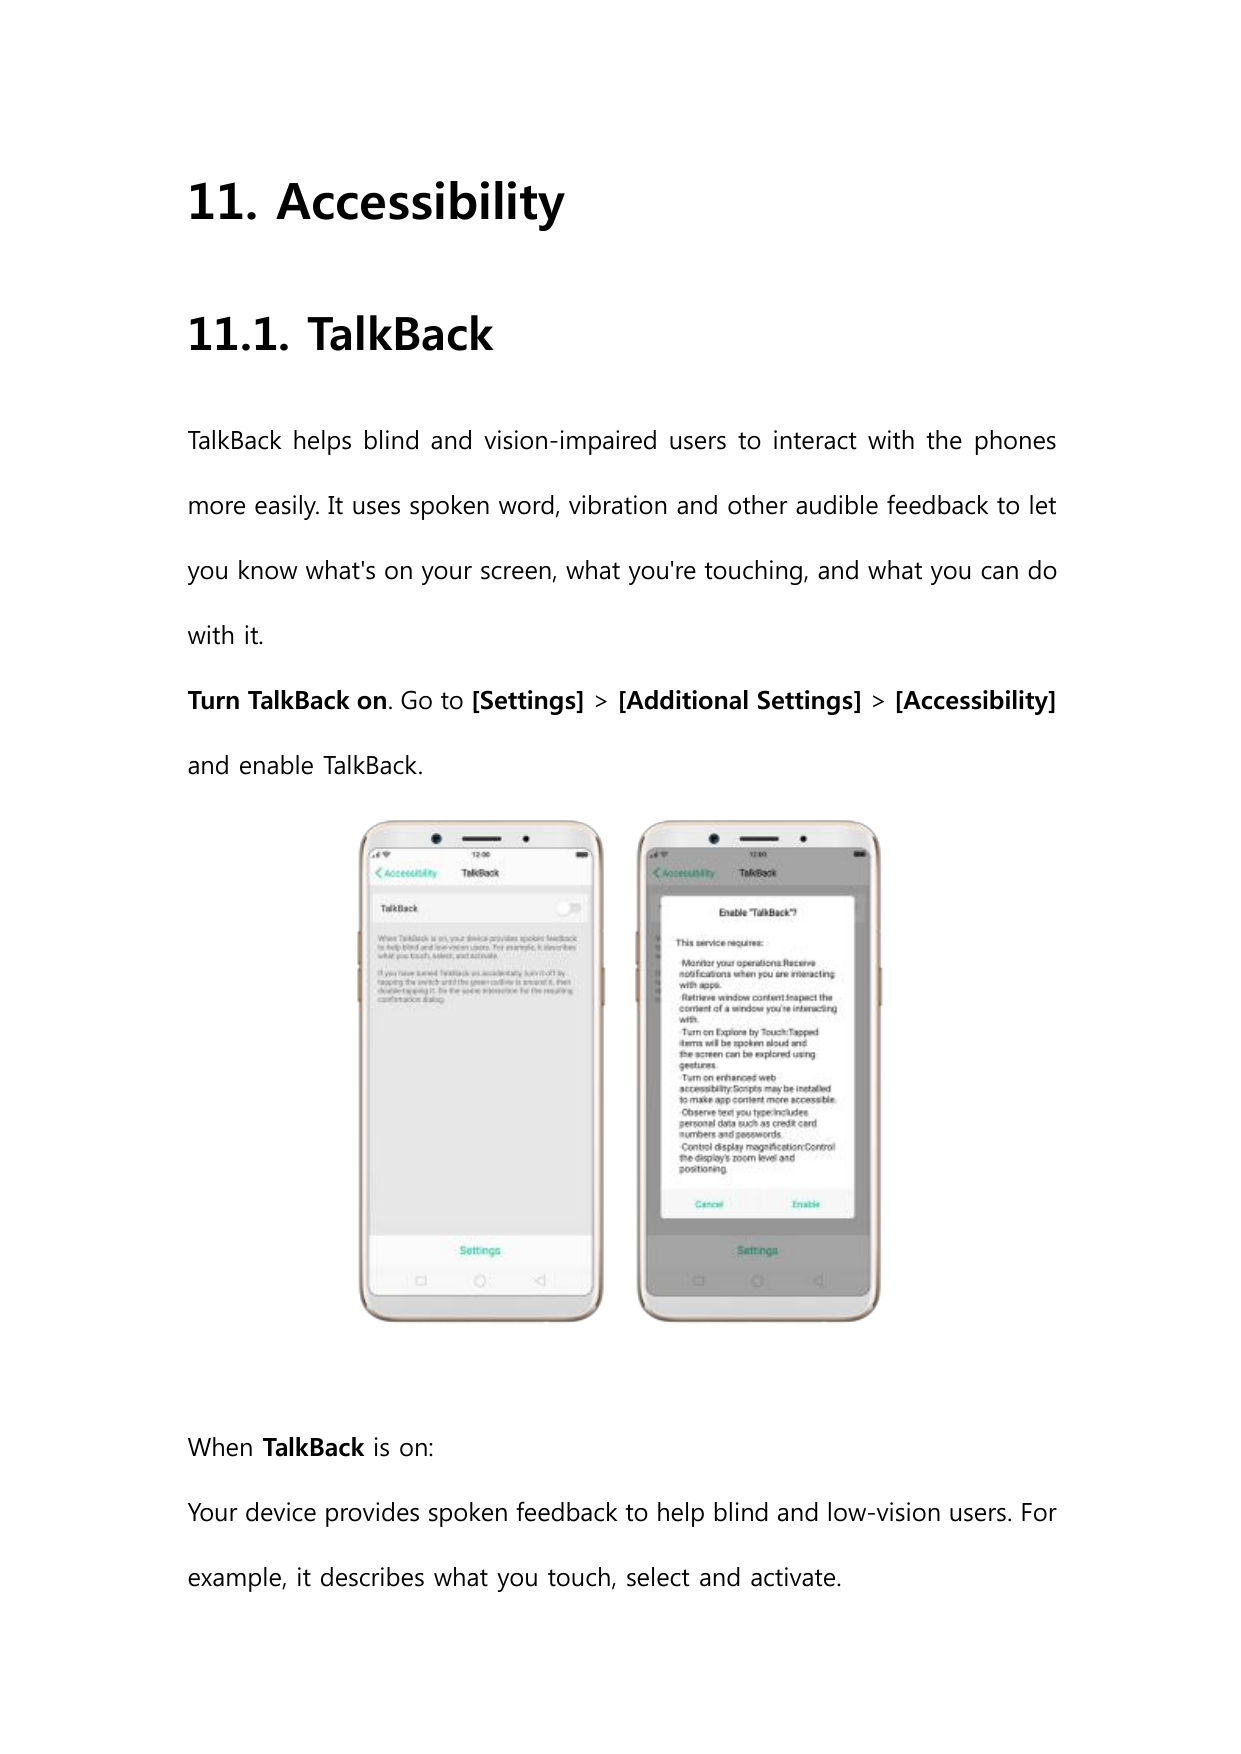 11. Accessibility11.1. TalkBackTalkBack helps blind and vision-impaired users to interact with the phonesmore easily. It uses sp